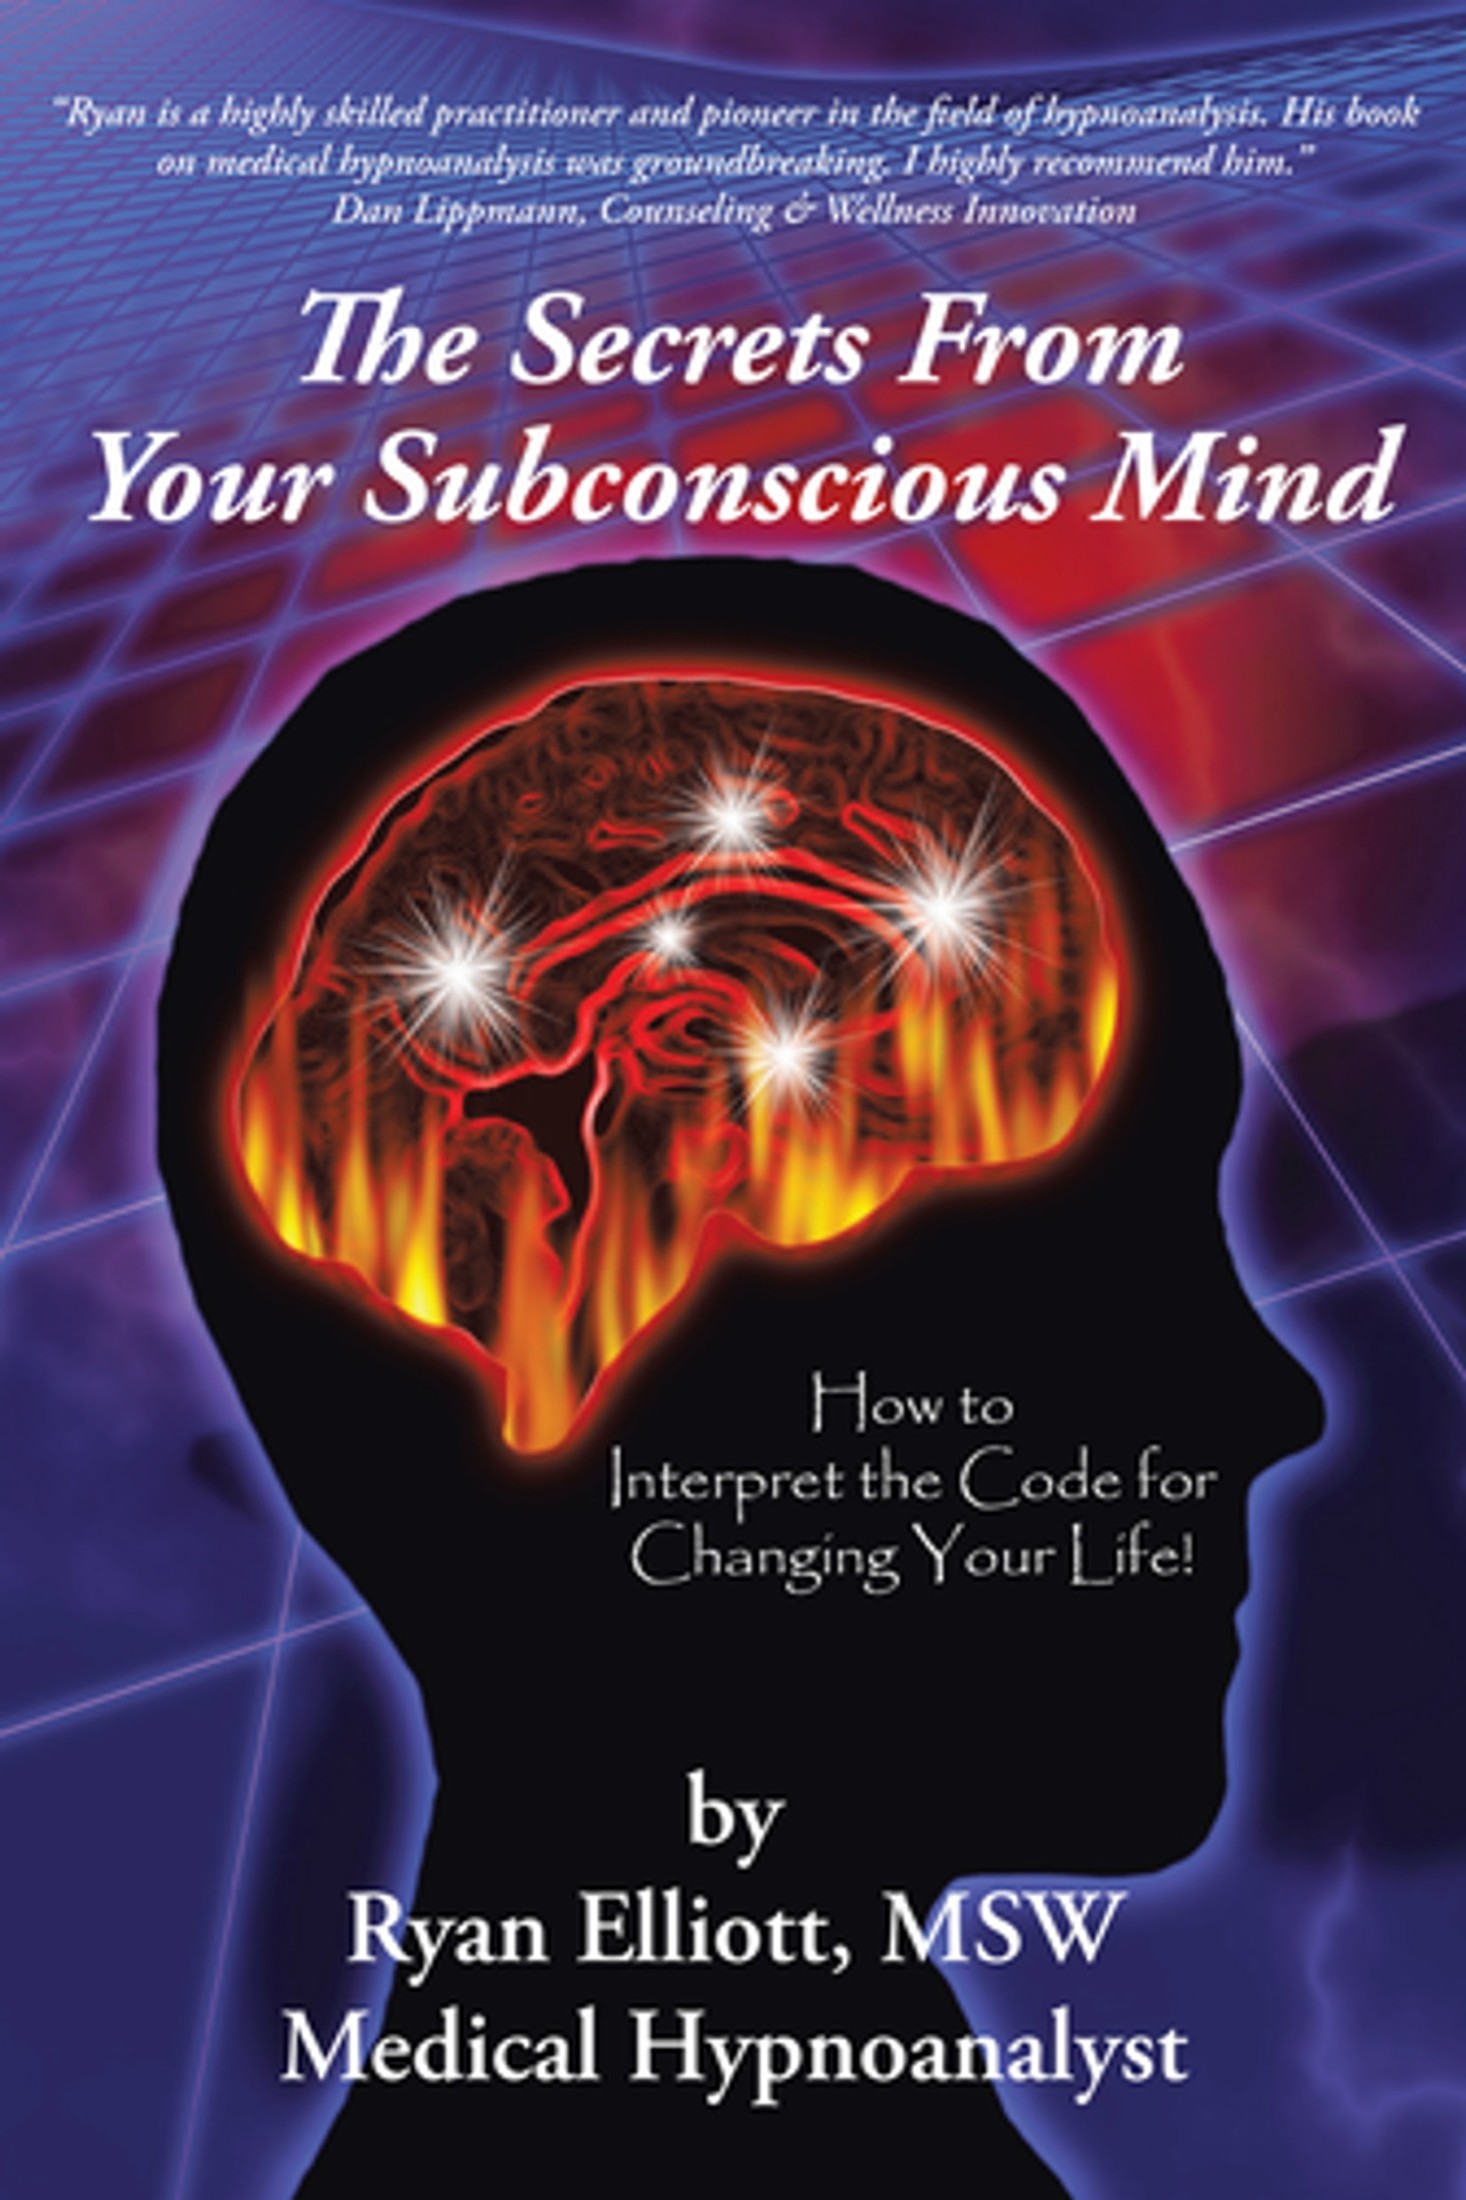 The Secrets From Your Subconscious Mind: How to Interpret the Code for Changing Your Life!